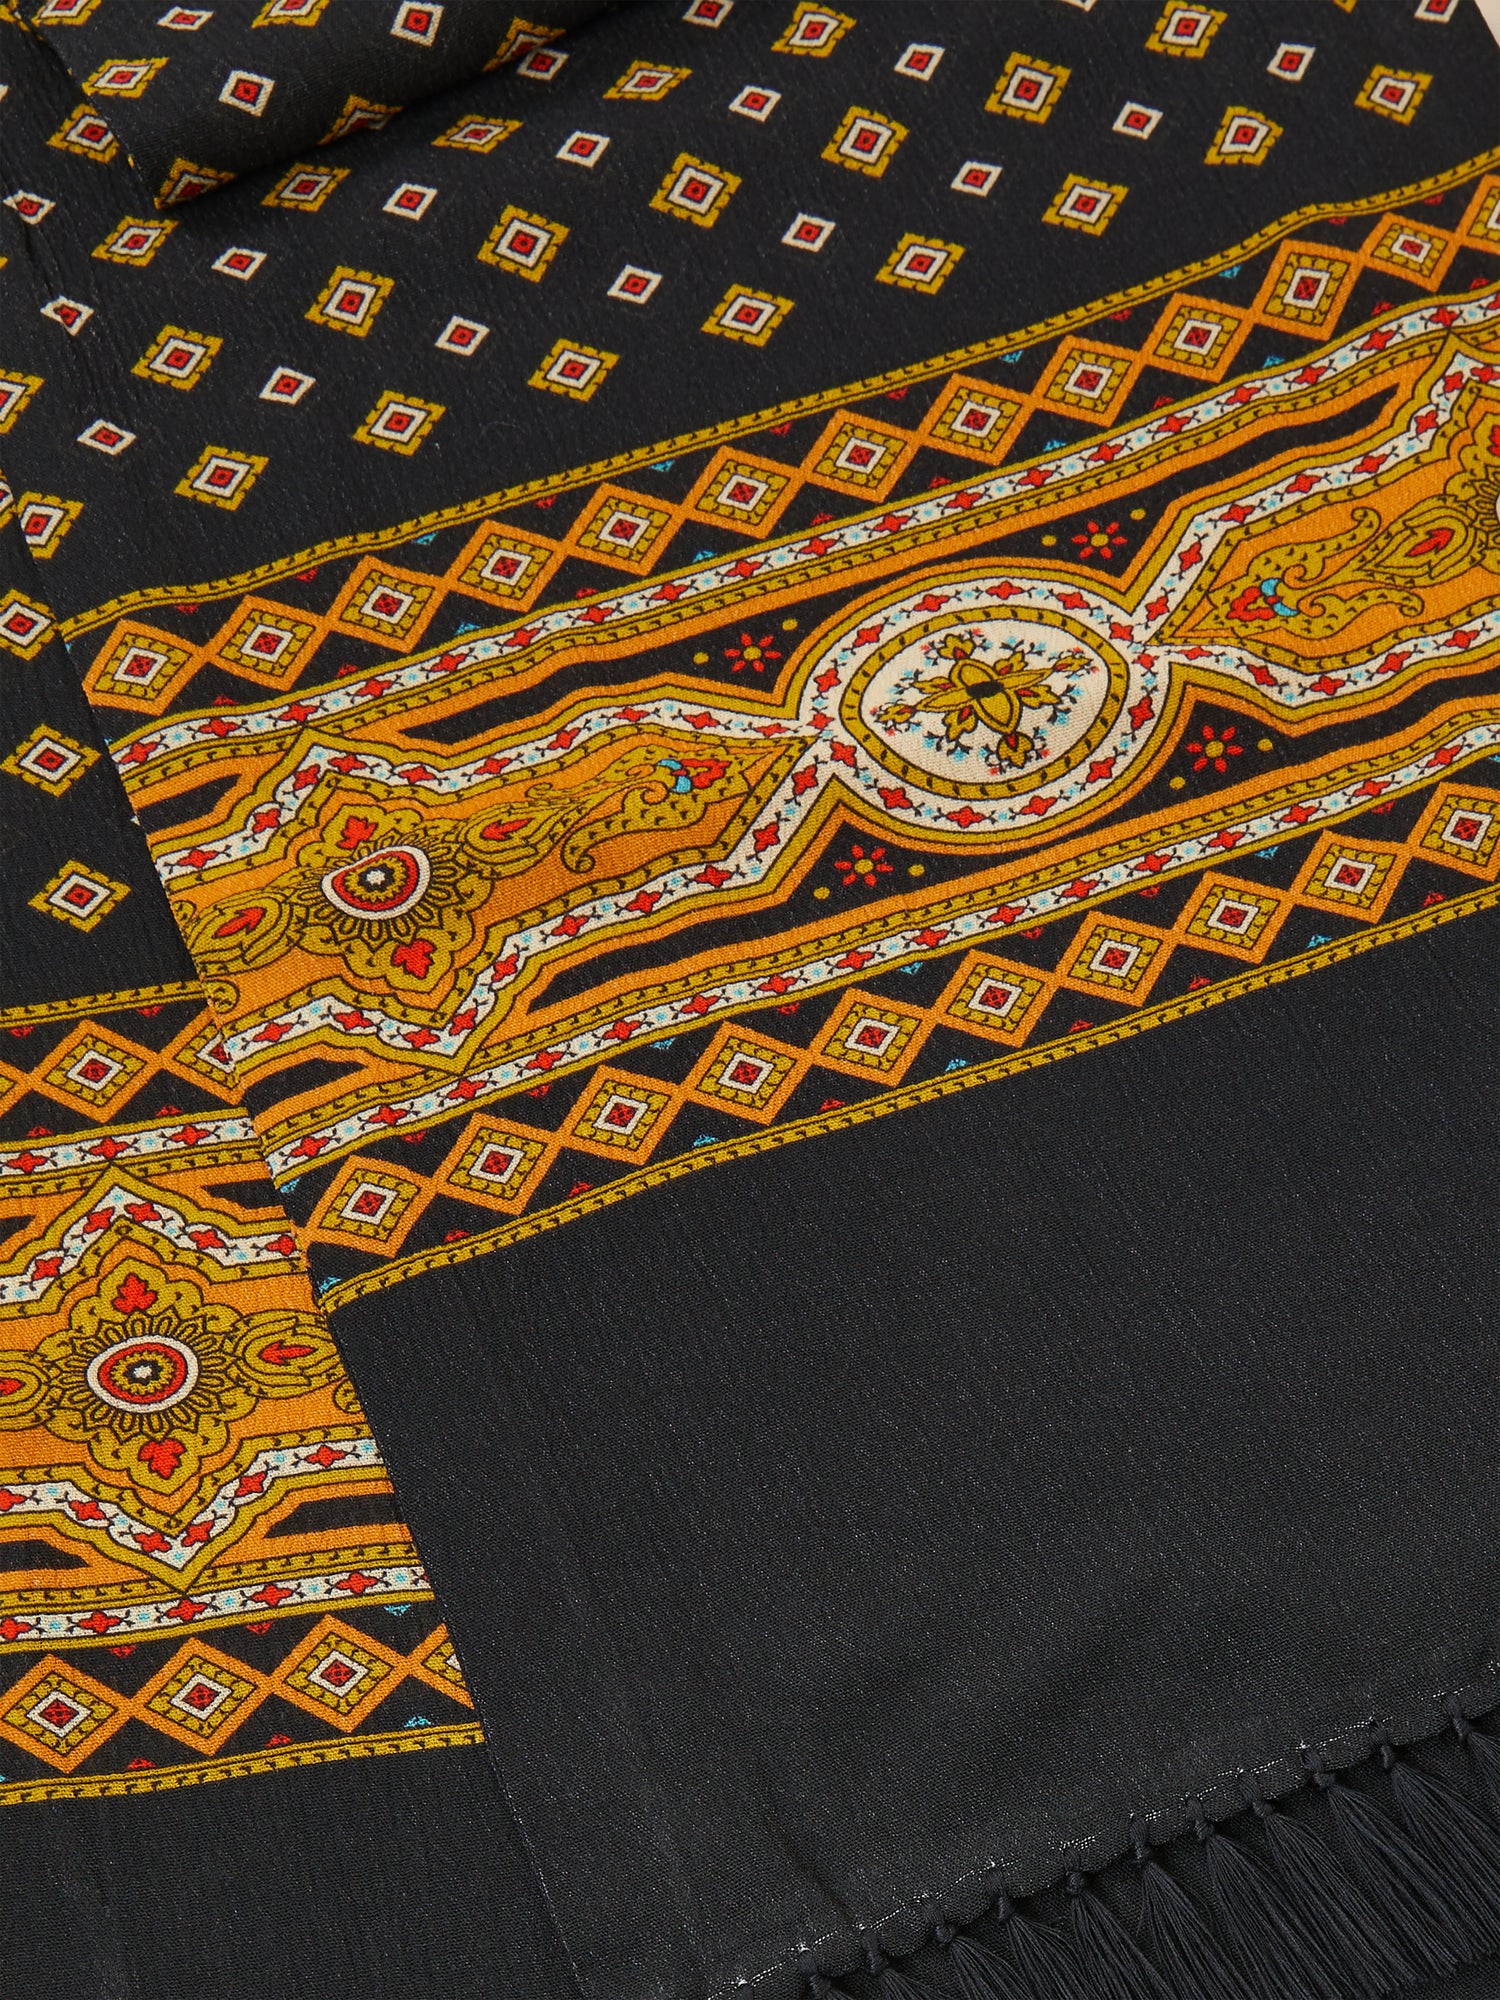 A Pastures Print Scarf with an ornate Indo-Aryan prints, hand-tied tassels, by Found.